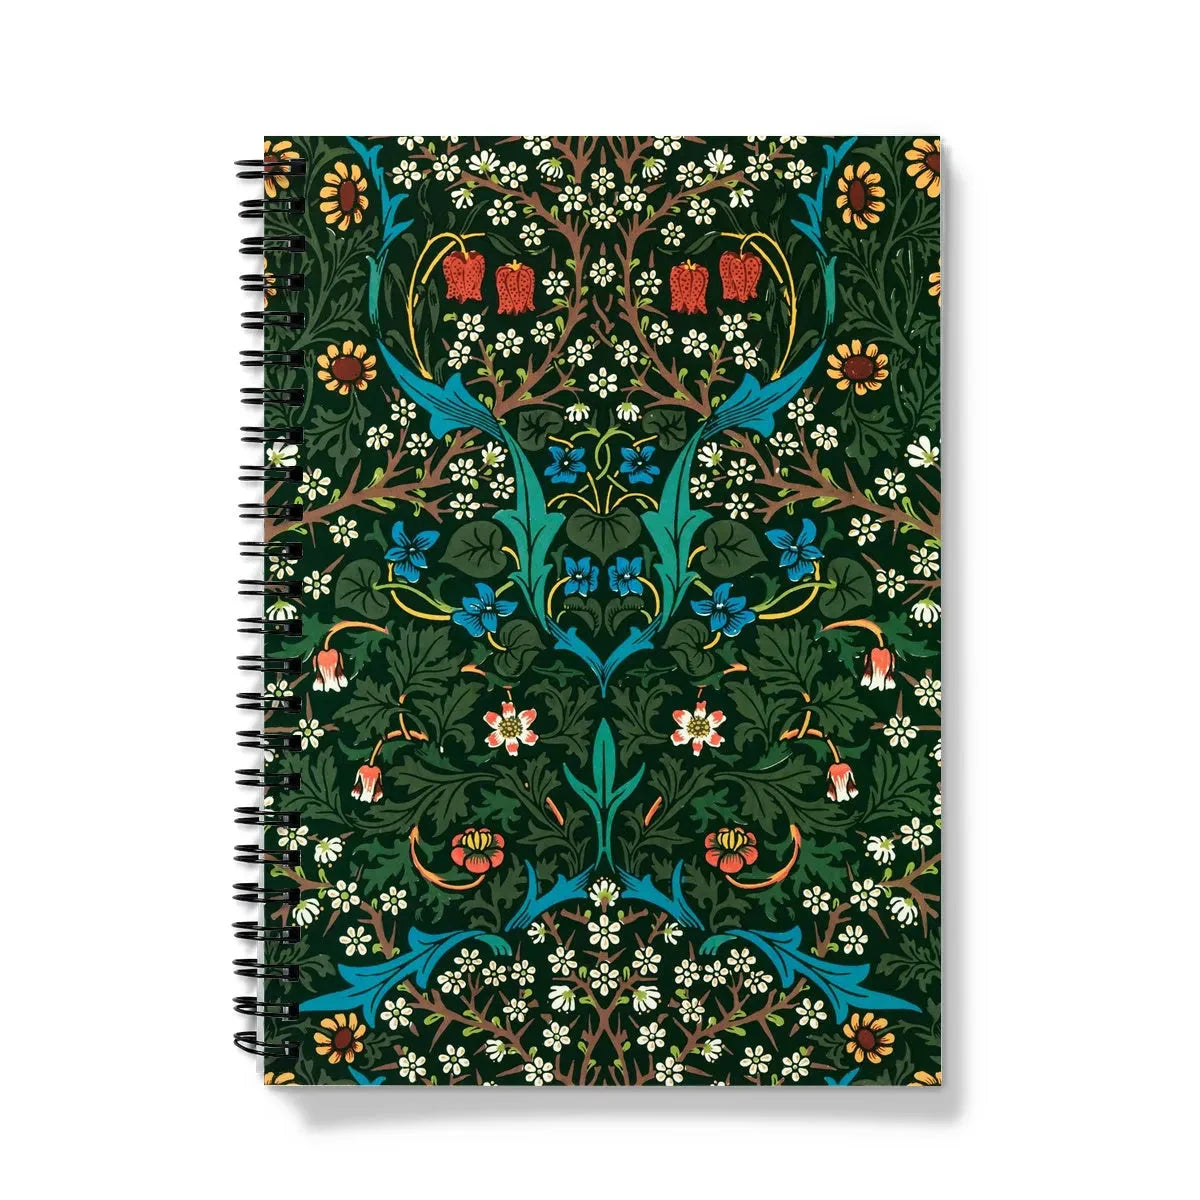 Tulips By William Morris Notebook - A5 - Graph Paper - Notebooks & Notepads - Aesthetic Art